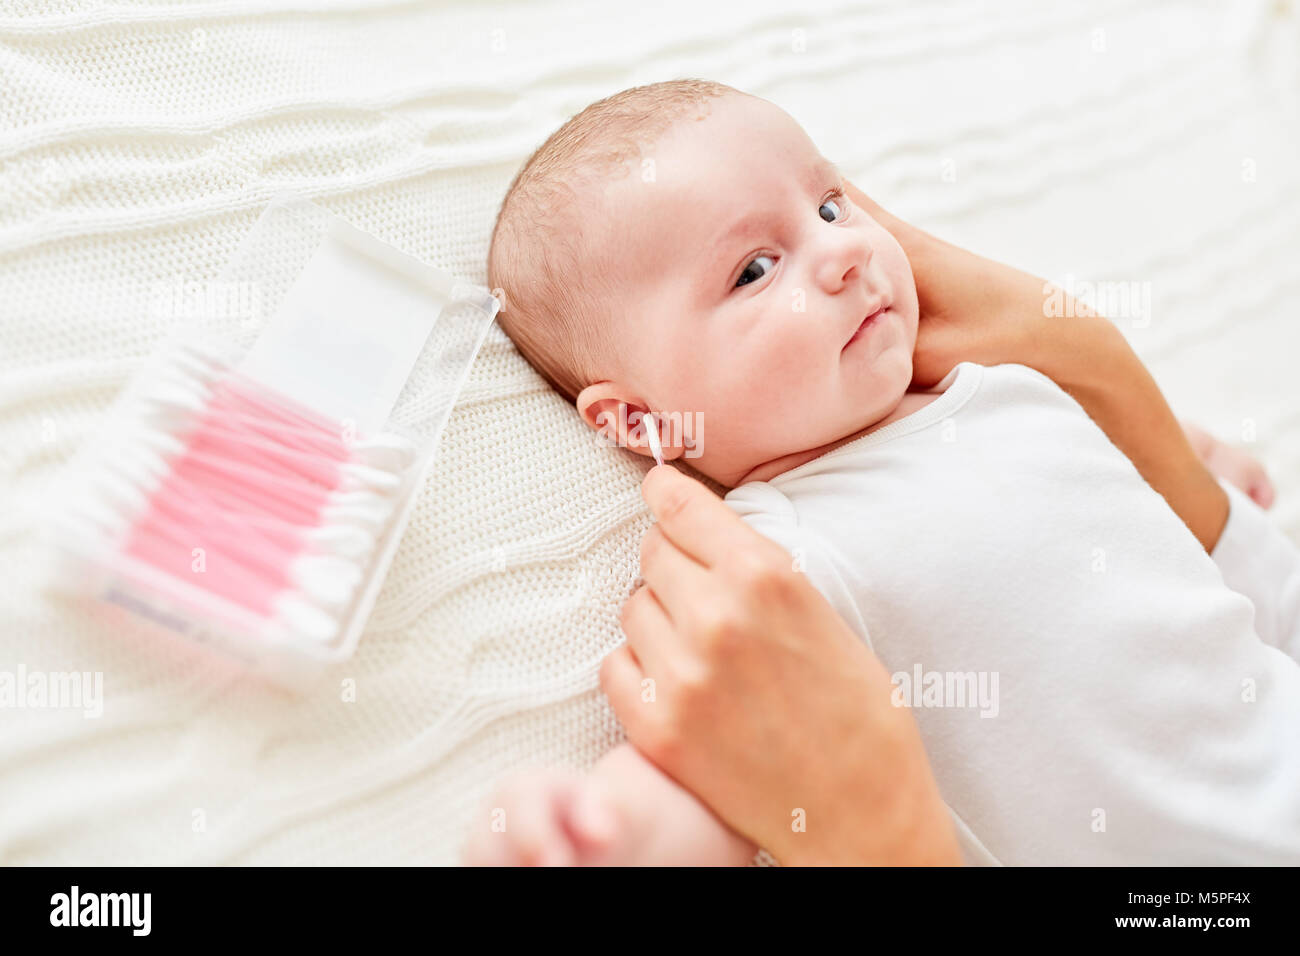 Hand cleans the ears of a baby with a cotton swab Stock Photo